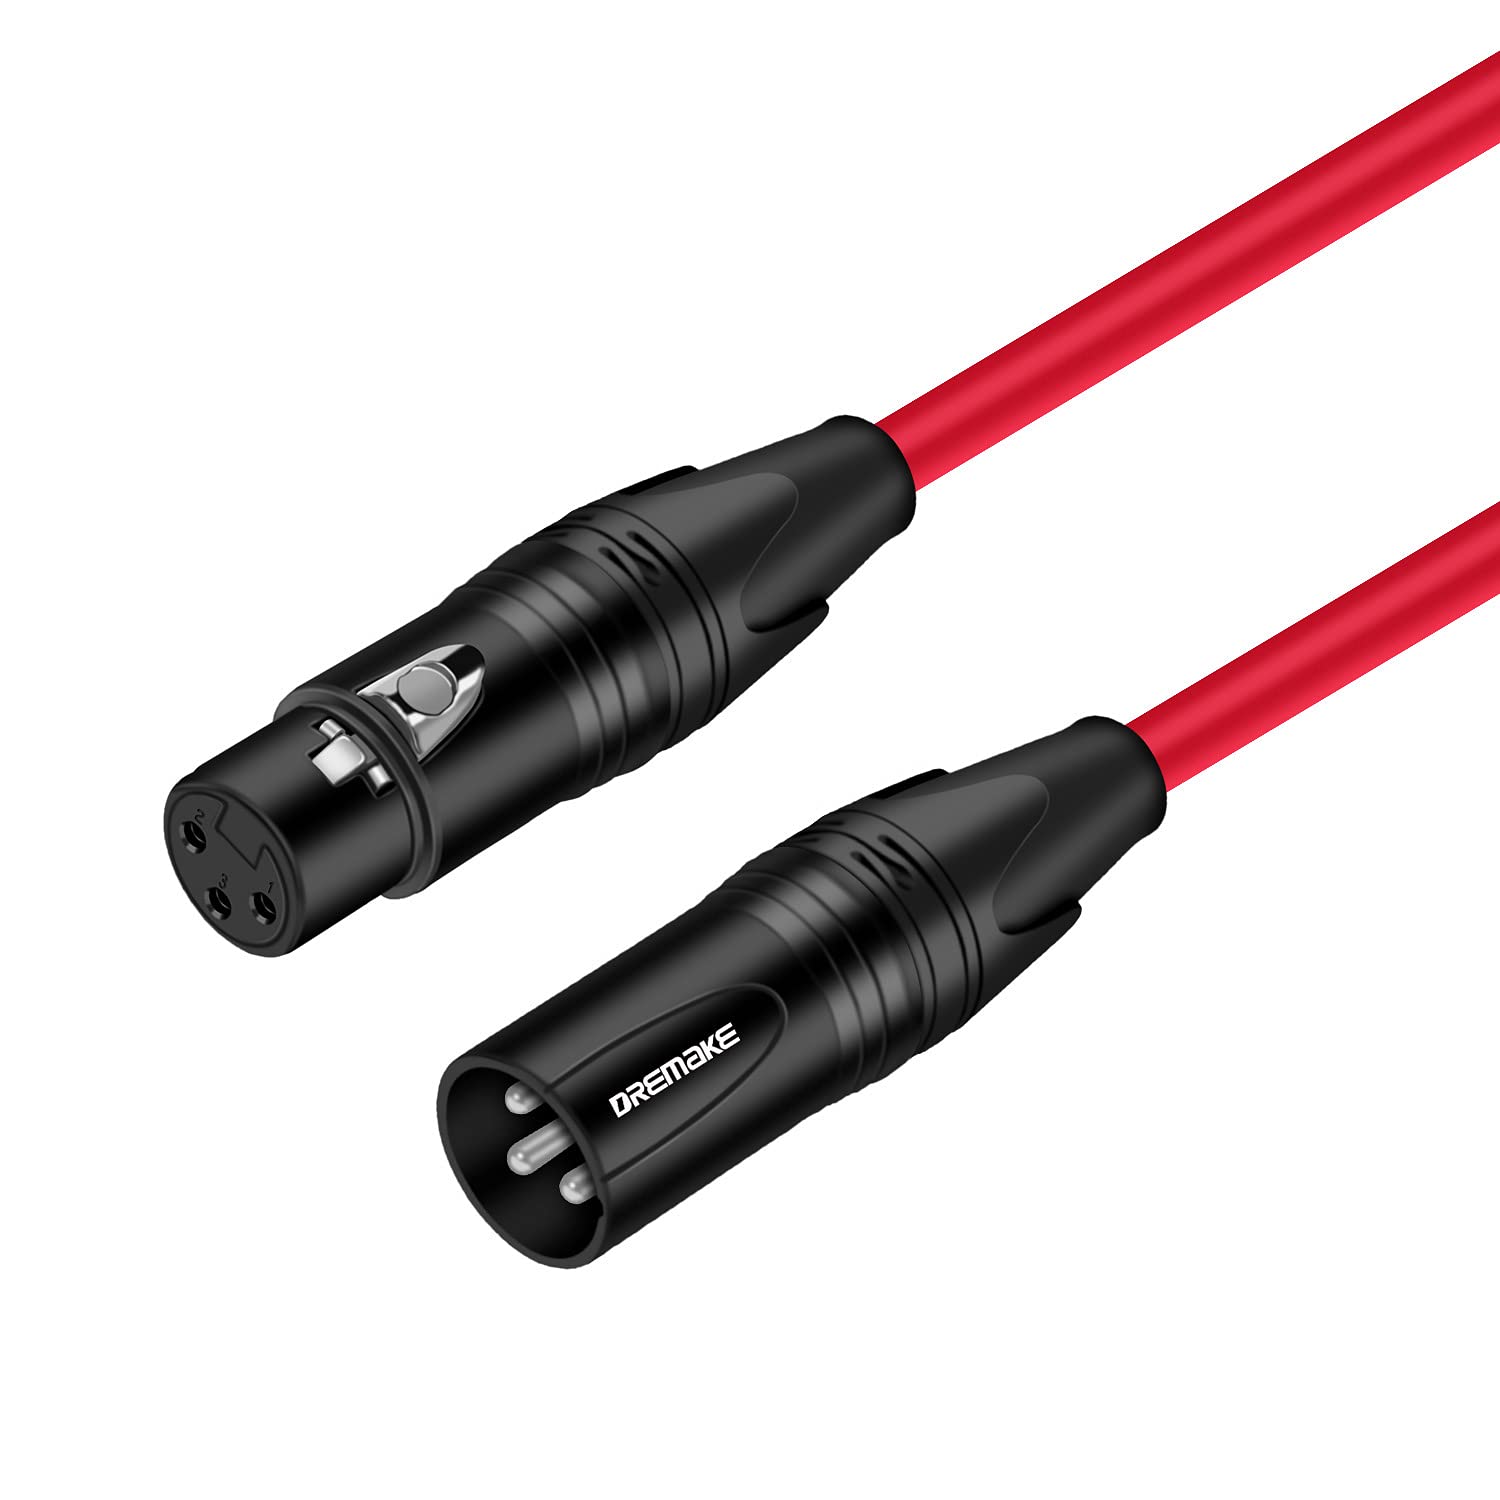 DREMAKE XLR Instrument Microphone Audio Extension Cord 6FT Balanced 3 Pin XLR Male to XLR Female Mic Cable - Red